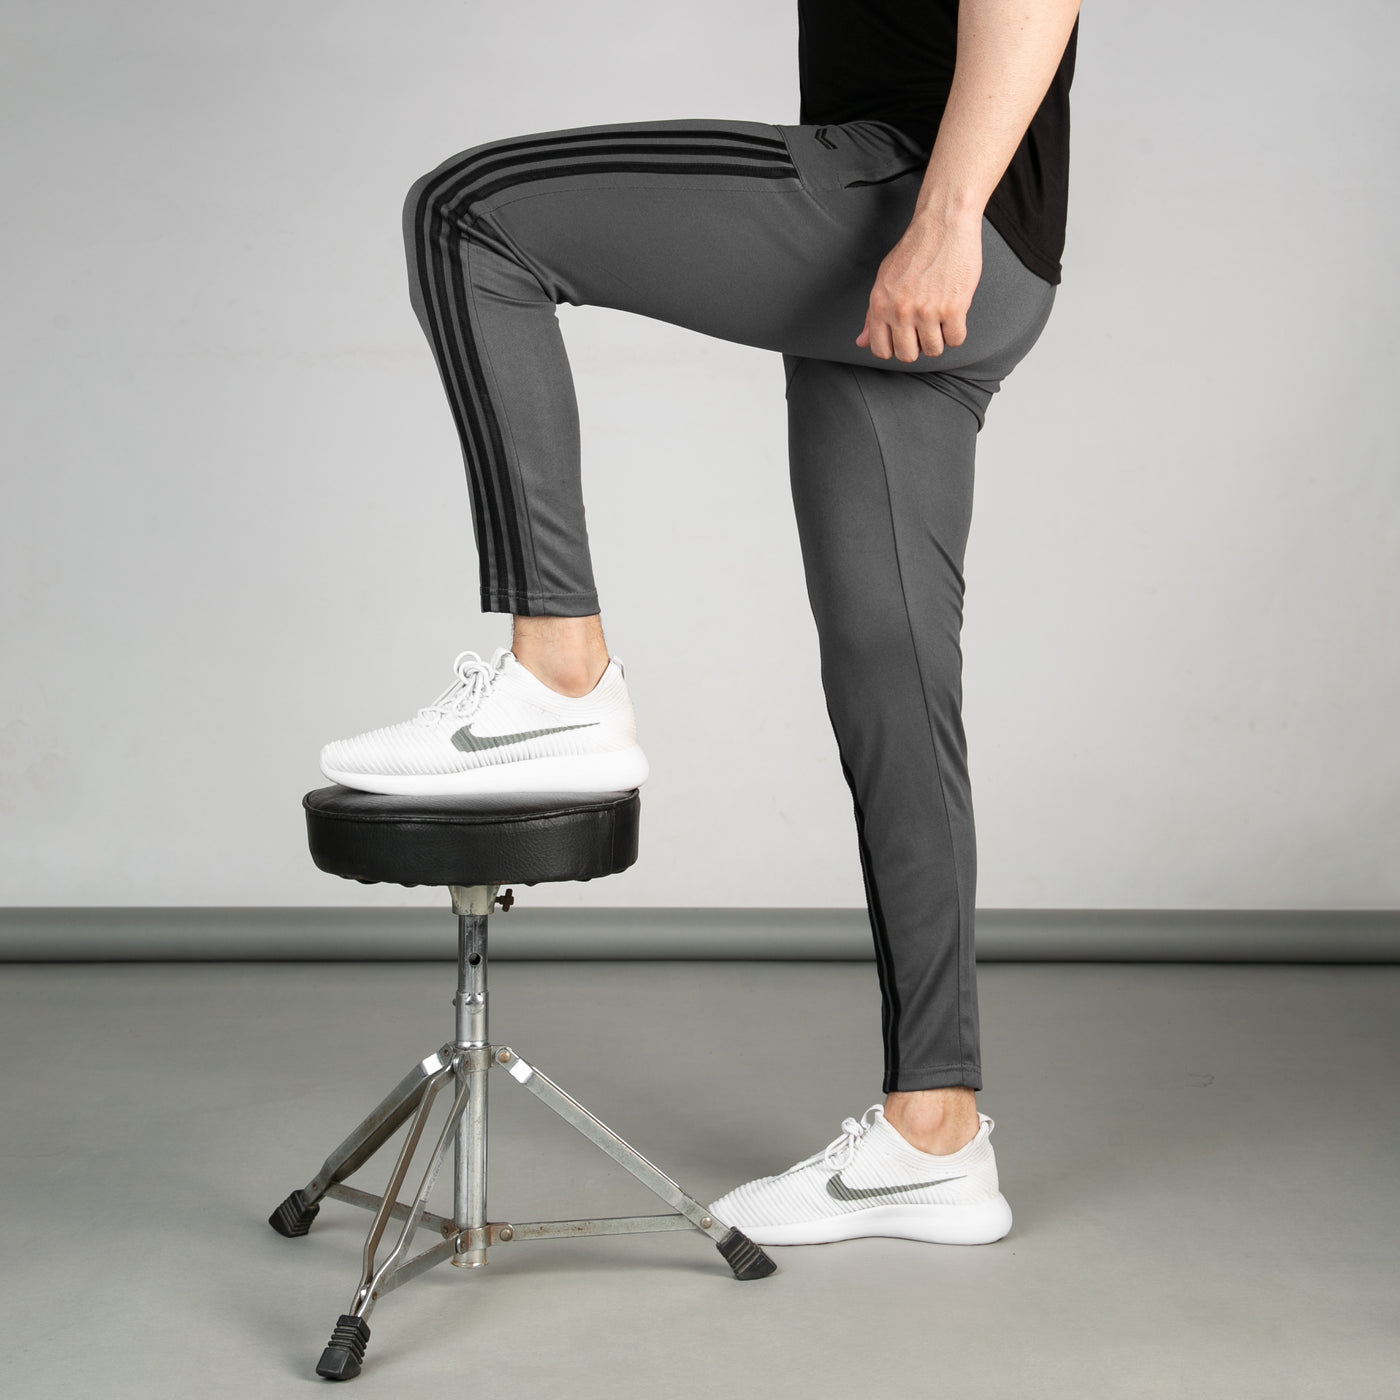 Gray Quick Dry Paneled Bottoms with Forward Three Black Stripes